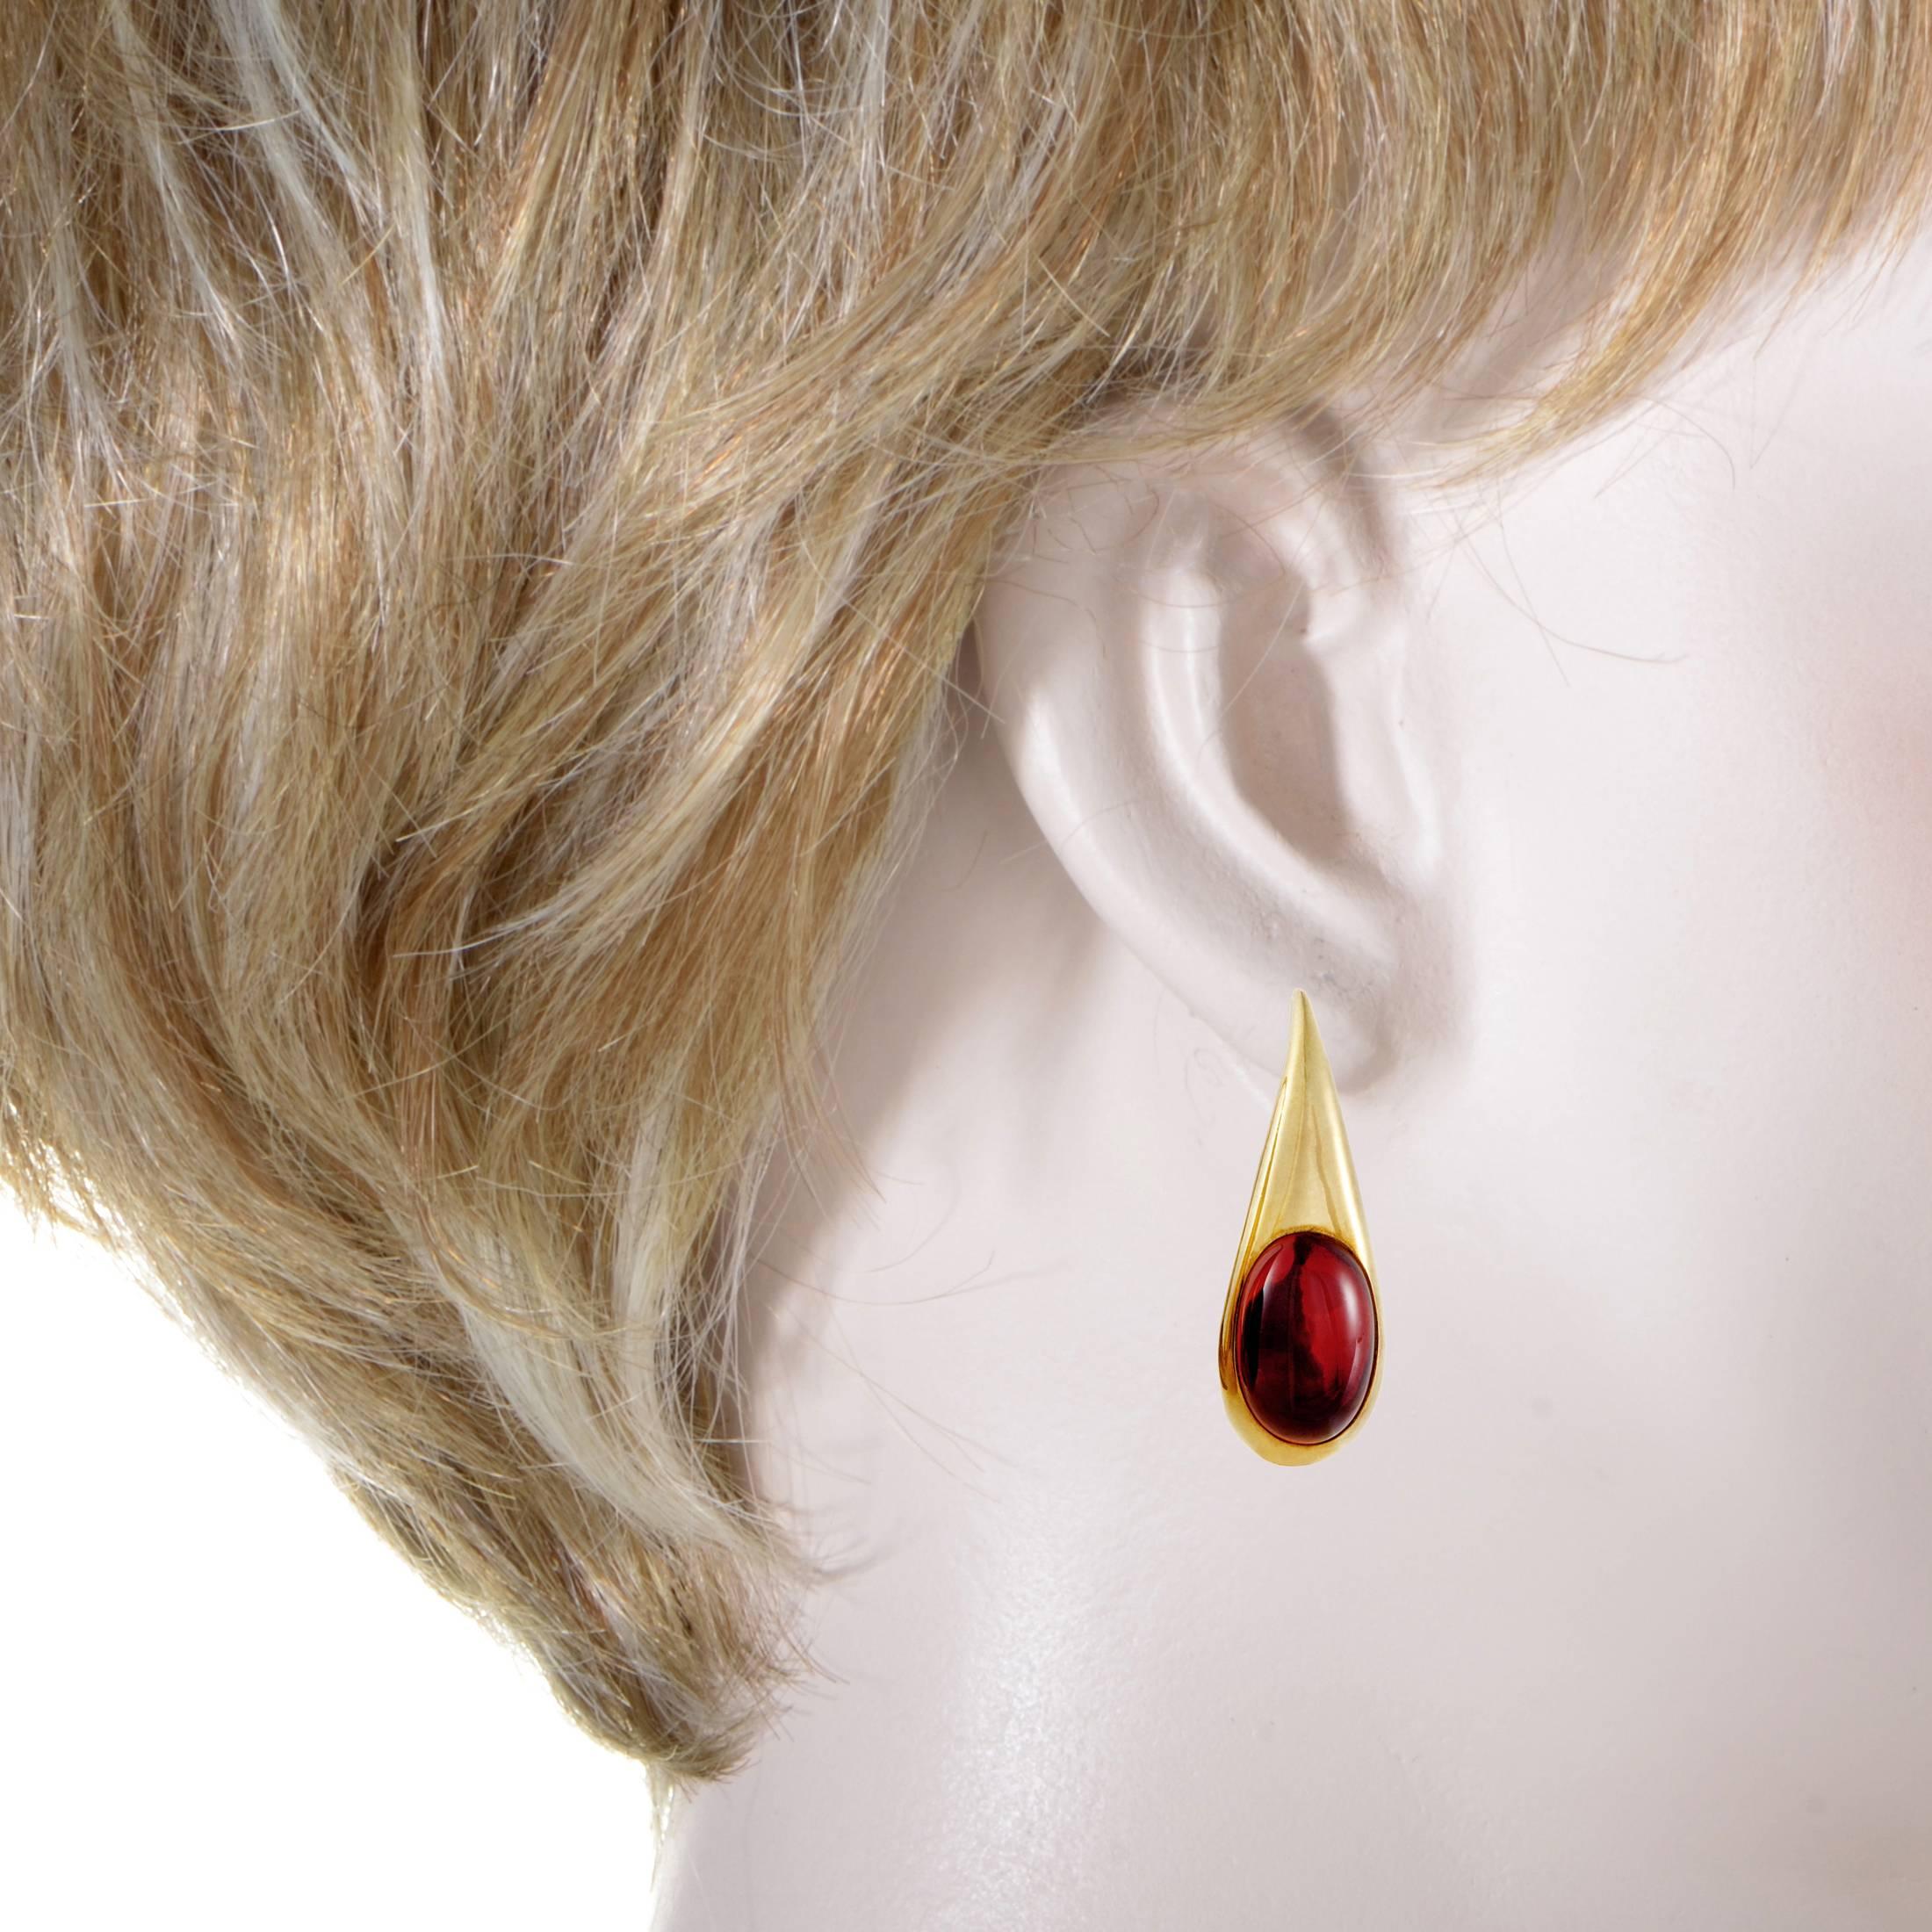 Boasting gracefully designed shapes and exquisite finishing touches for a sight of fascinating aesthetic sophistication, these spellbinding earrings from Pomellato are made of gleaming 18K yellow gold and set with gorgeous garnet stones.
Included